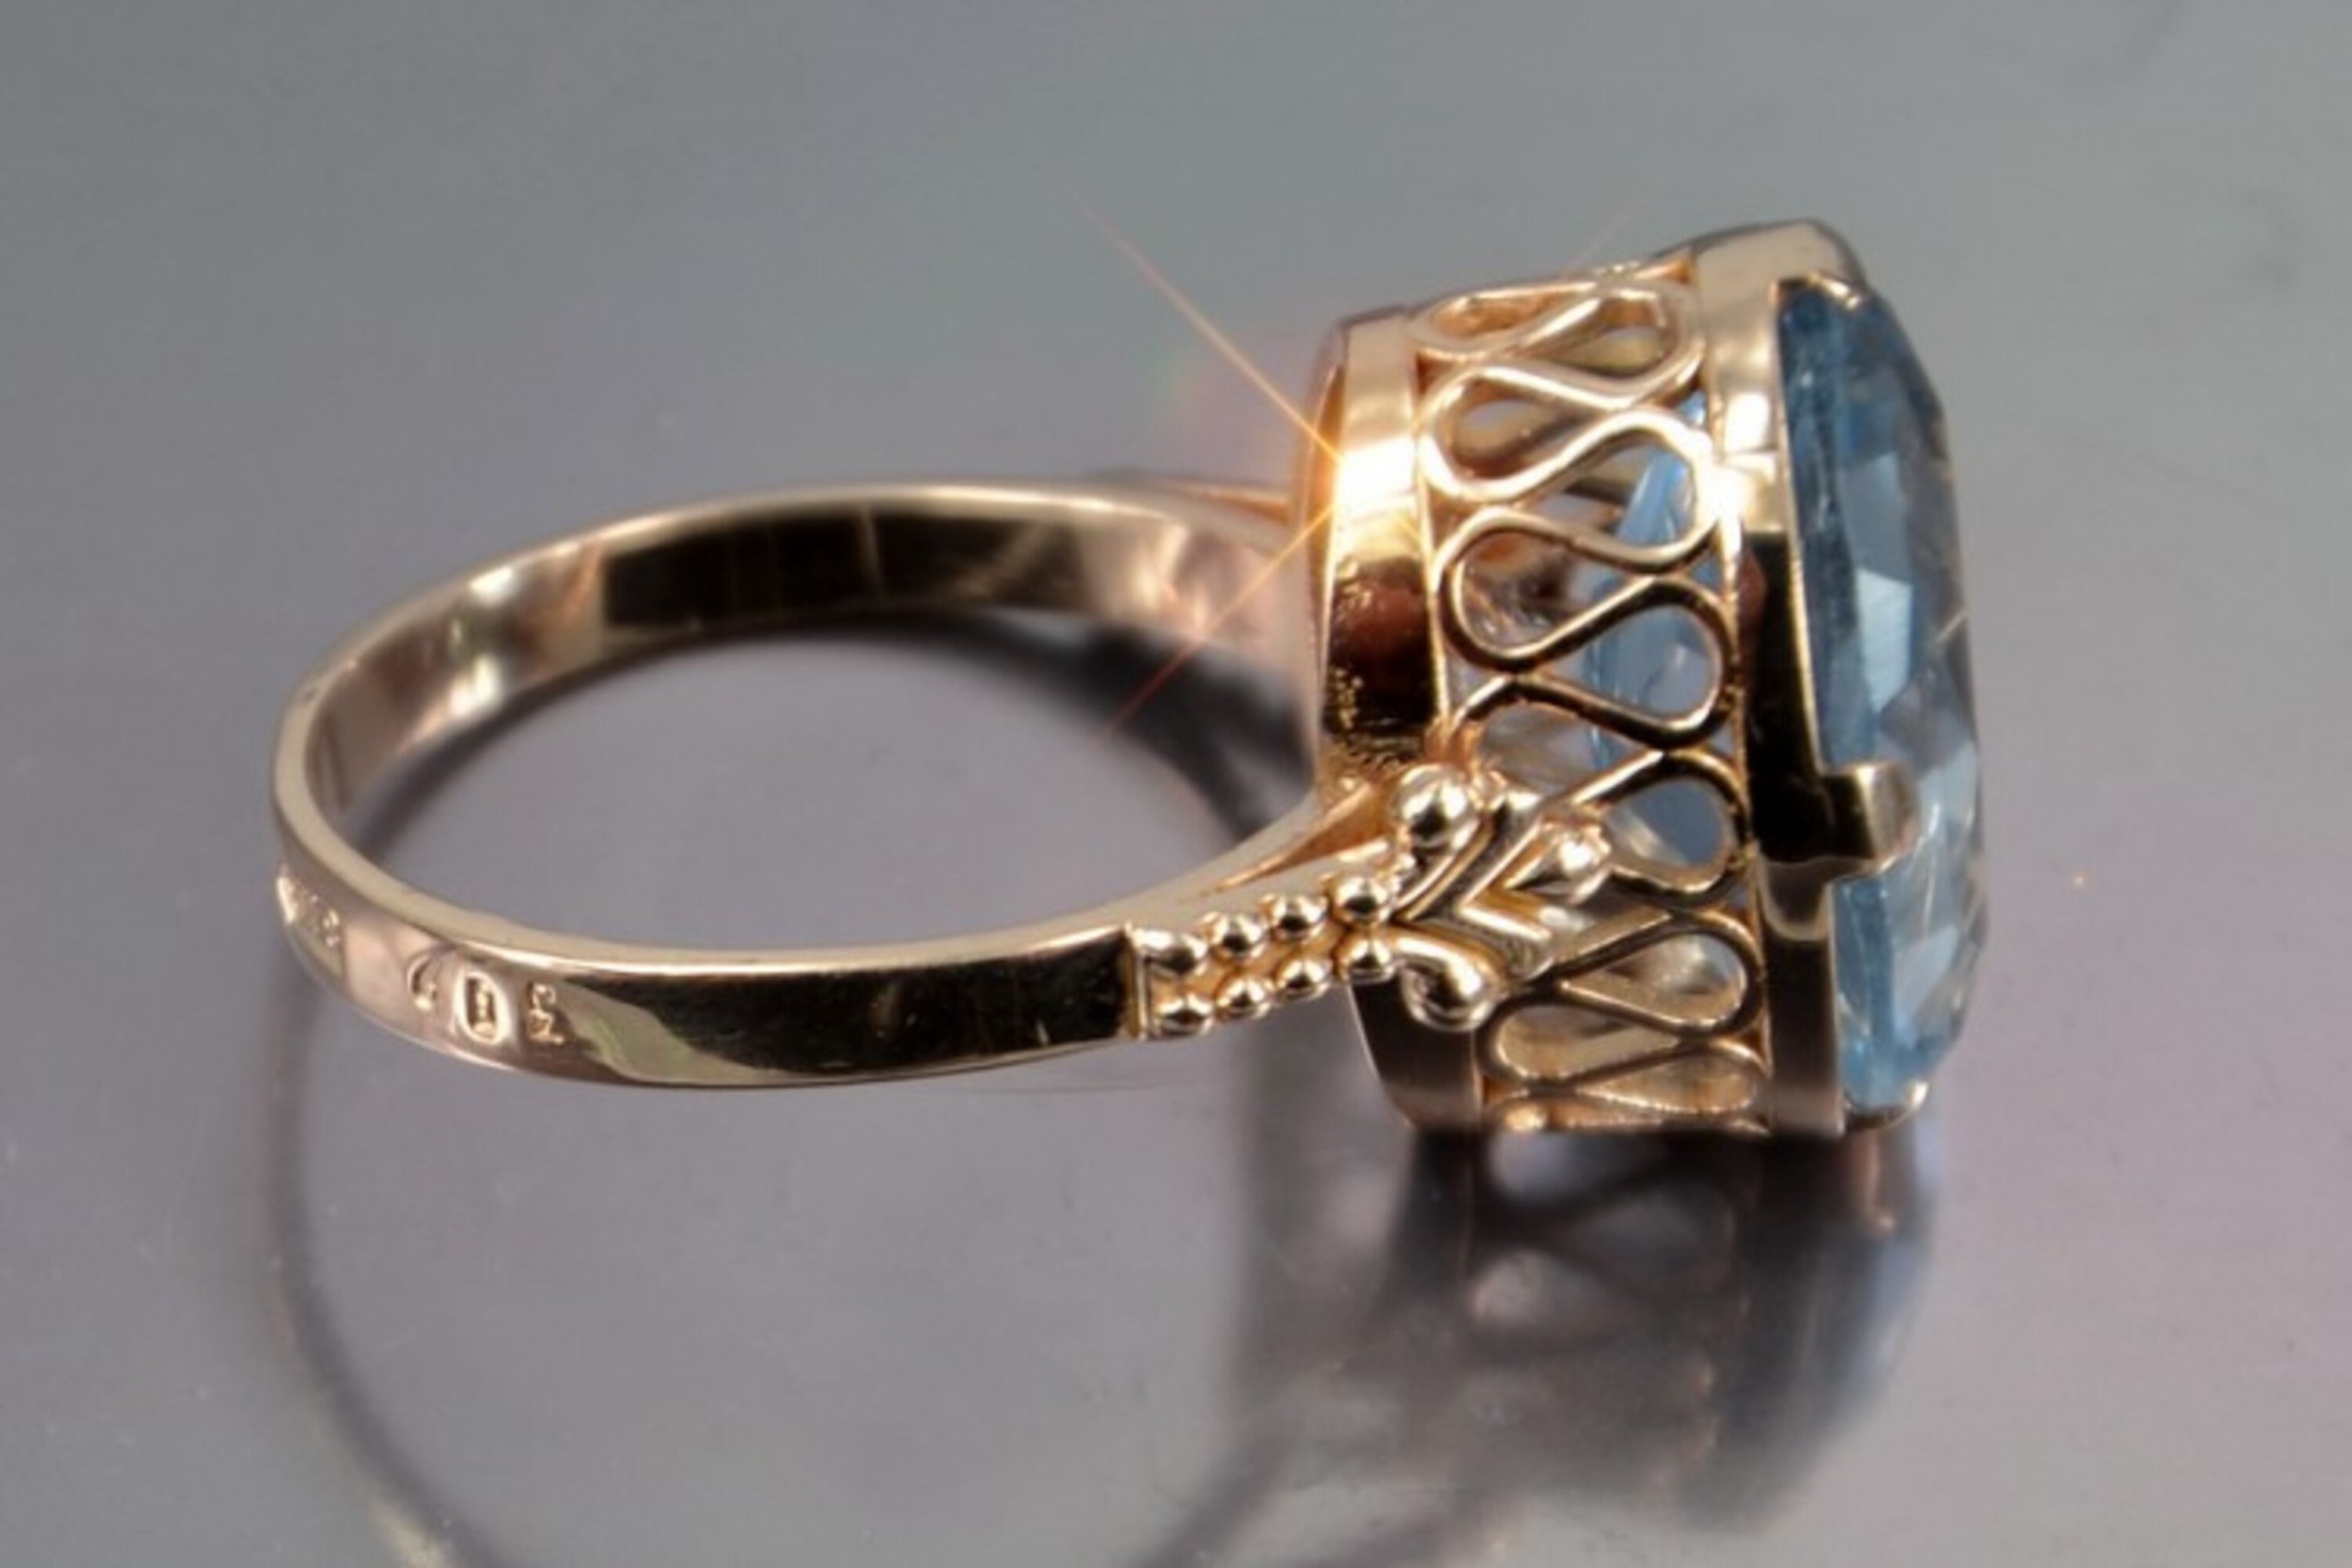 Russian Aquamarine Ring 14 KT Rose Gold Over Silver - Etsy